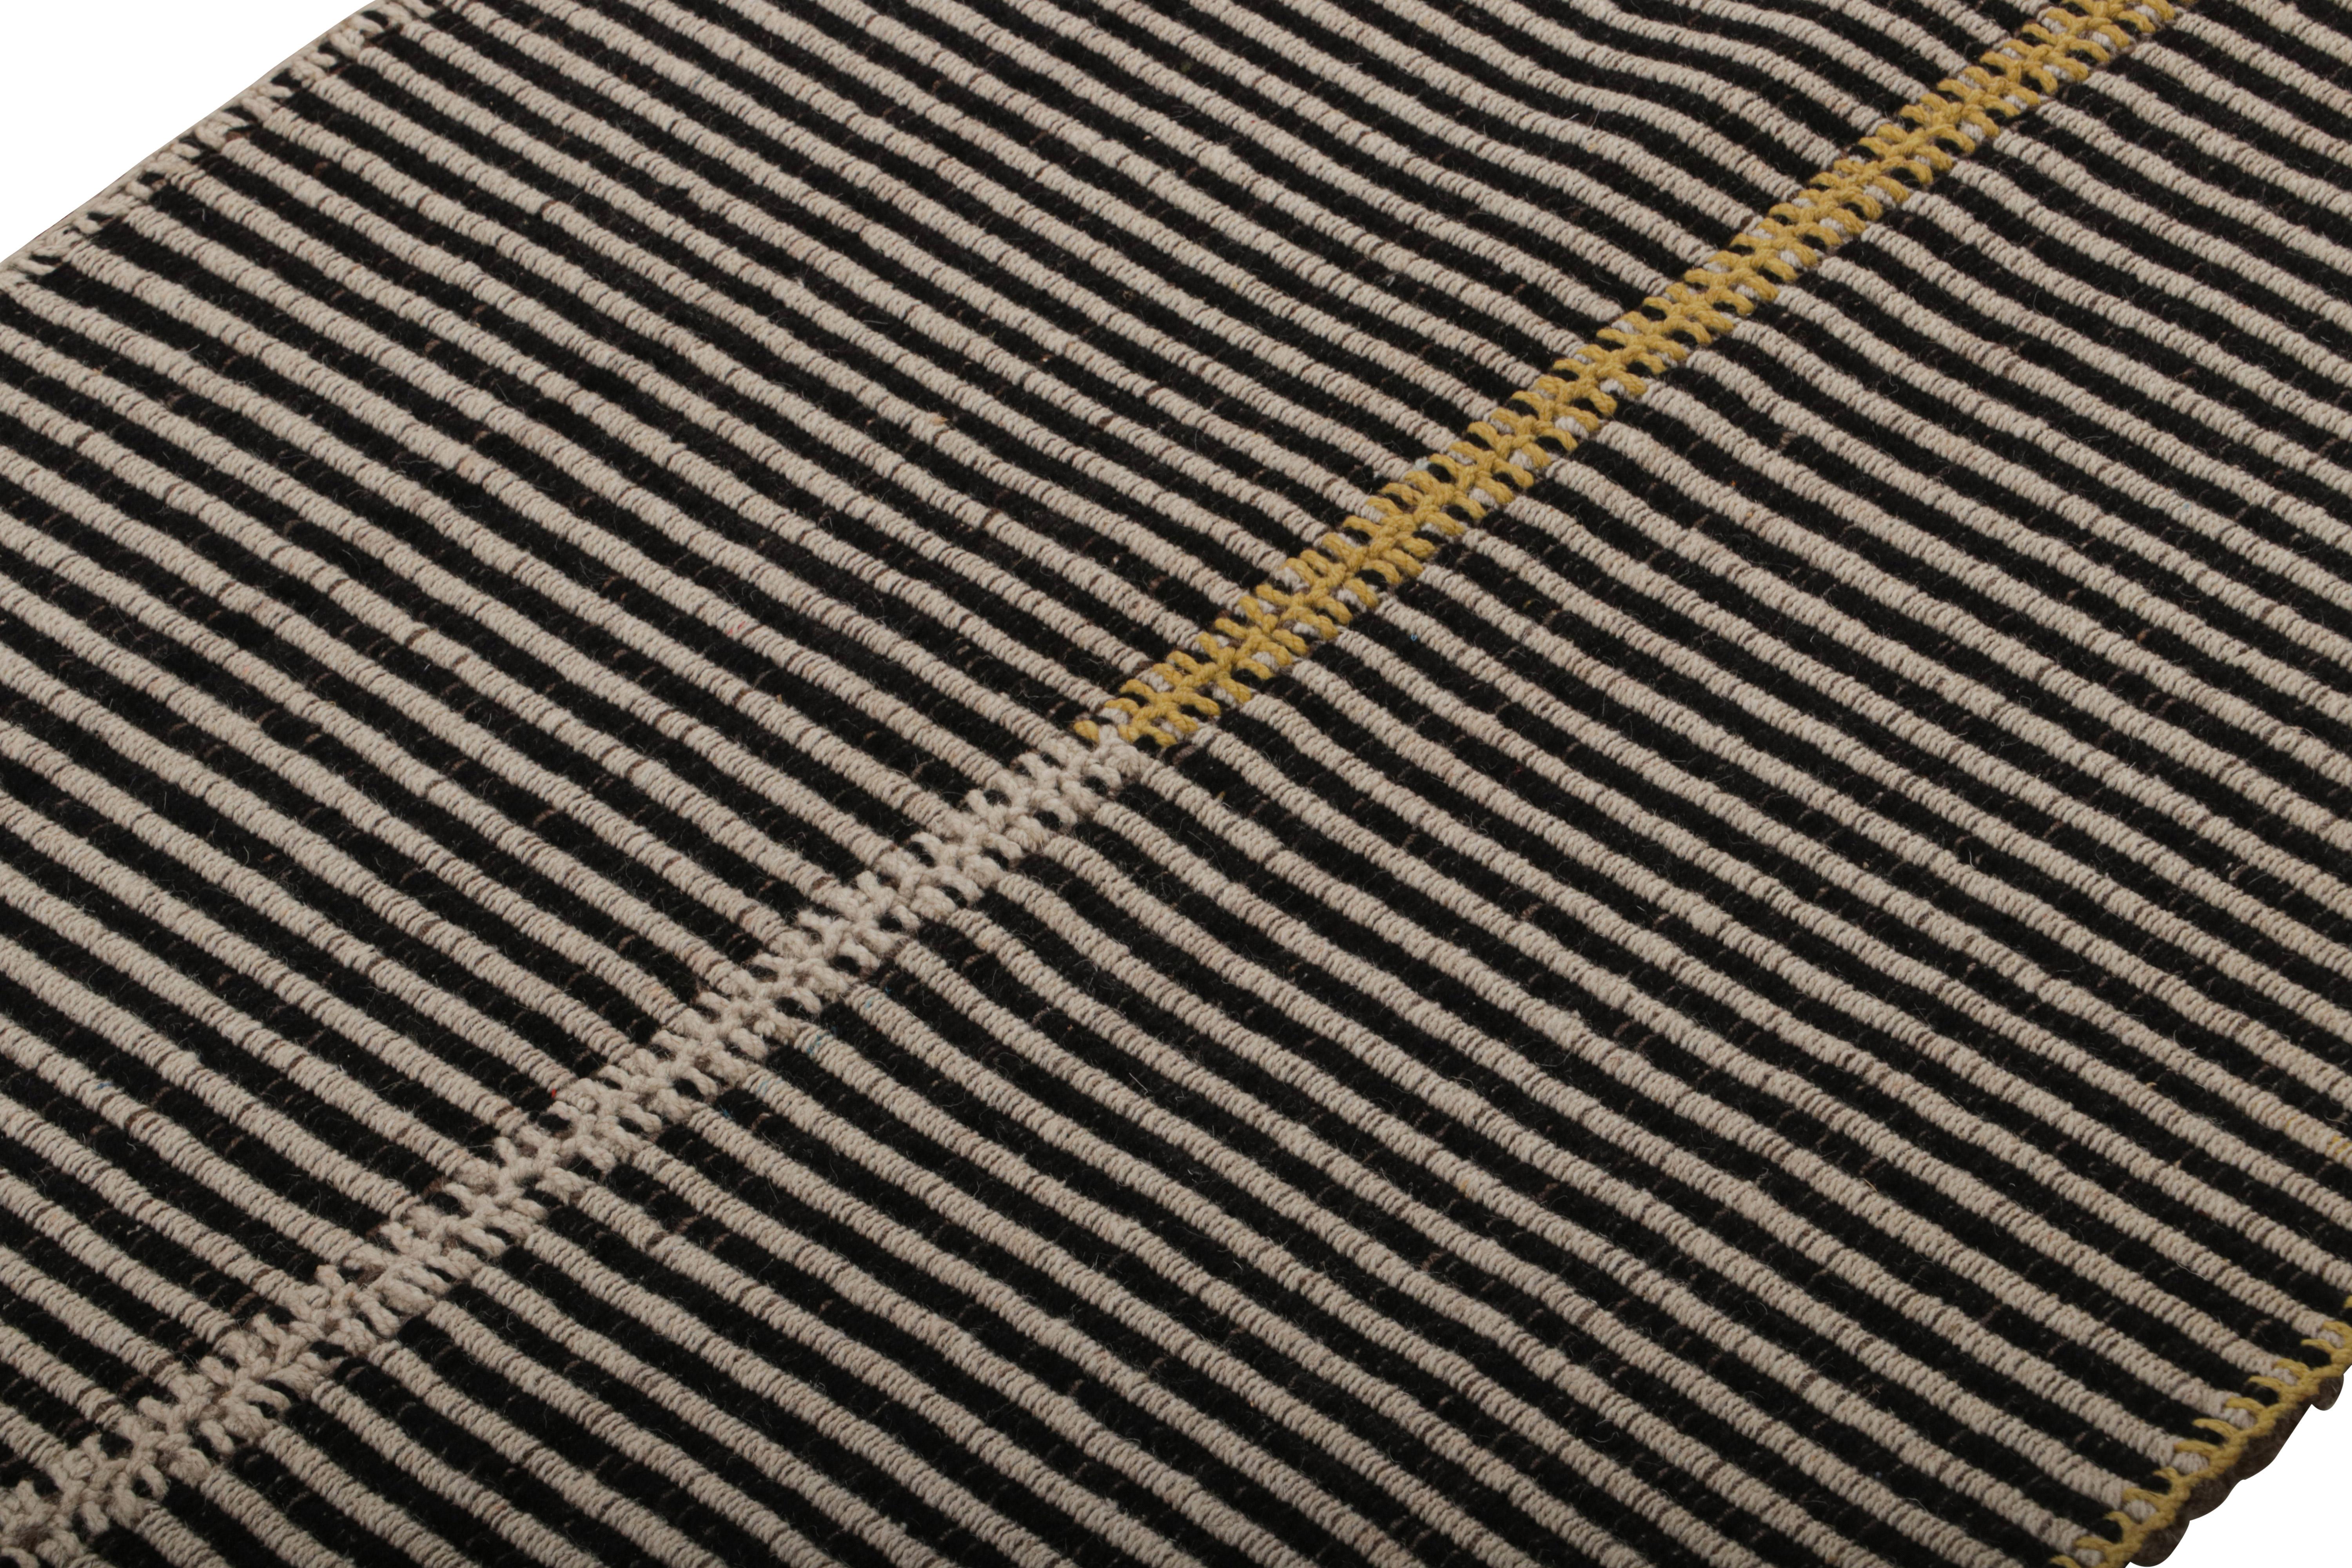 Handwoven in wool, a 3x4 Kilim design from an inventive new contemporary flat weave collection by Rug & Kilim.

On the Design: 

Fondly dubbed, “Rez Kilims”, this modern take on Classic panel-weaving enjoys a fabulous, unique play of beige-brown